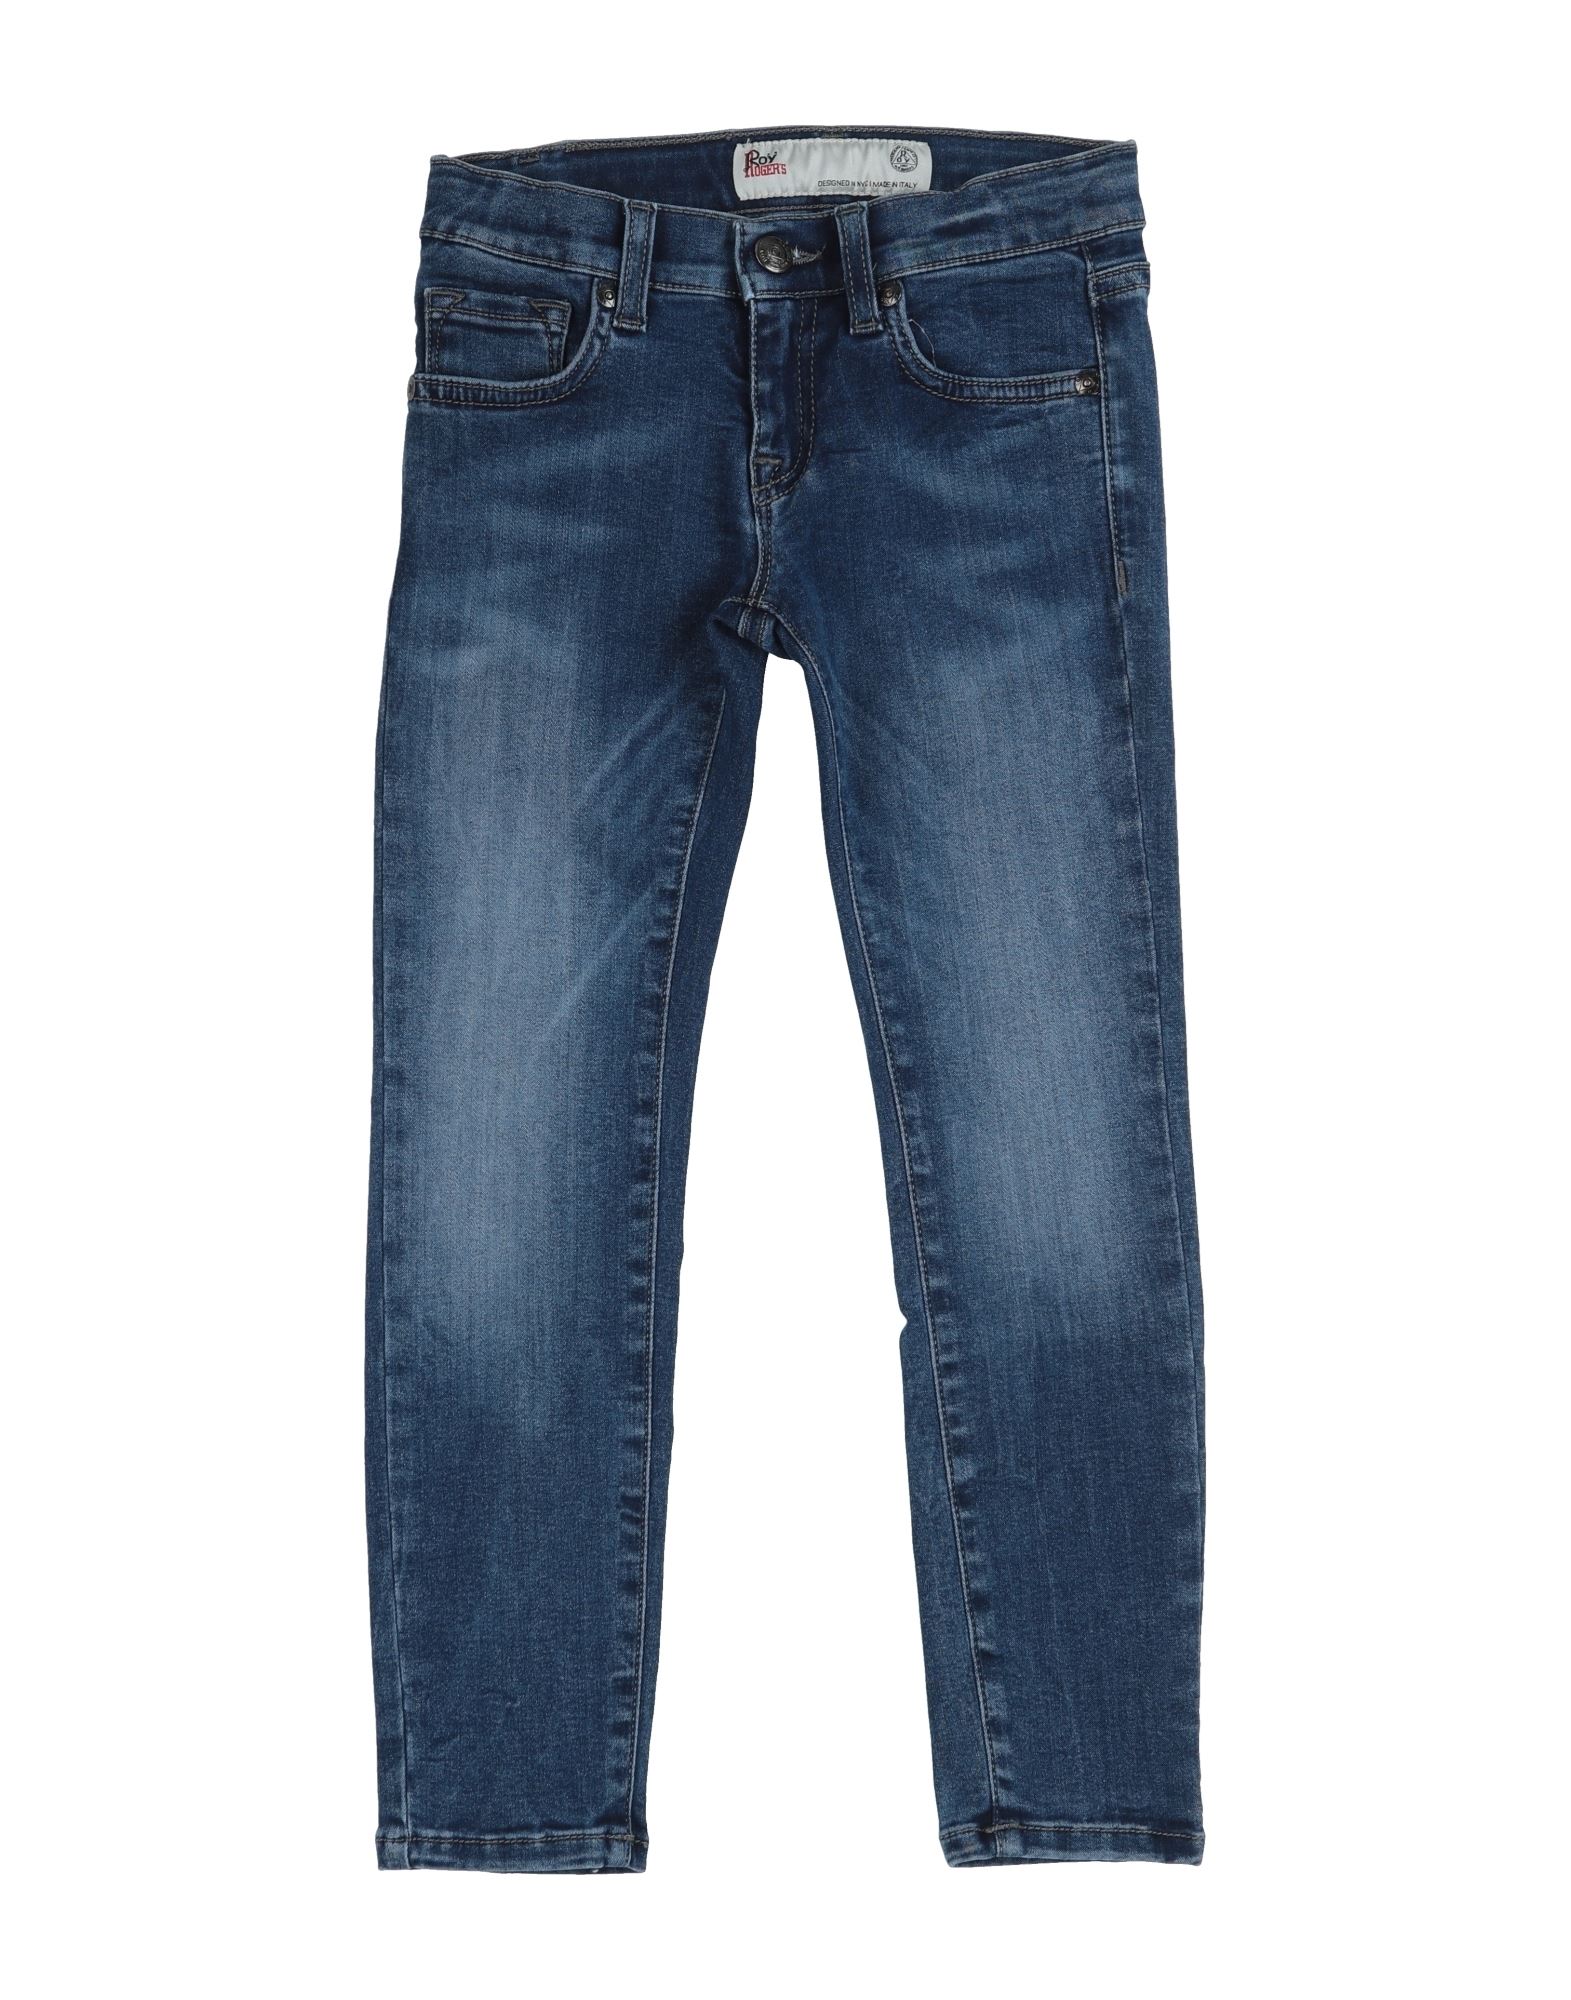 ROY ROGERS JEANS